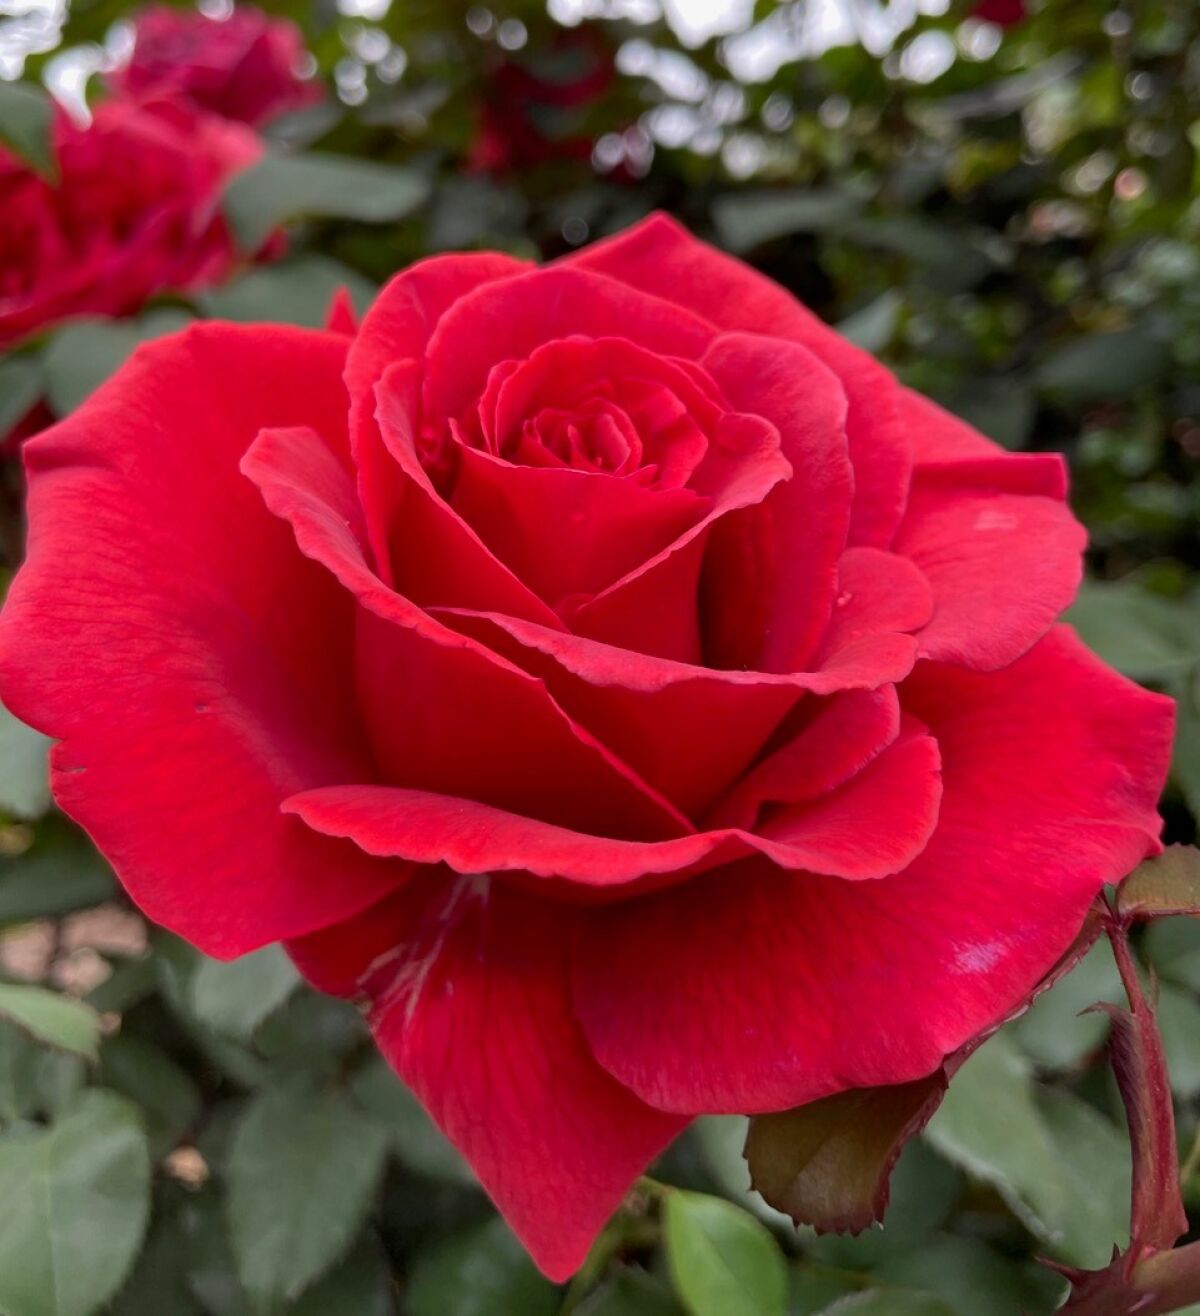 ‘Fragrant Cloud’ has a full bloom in rich red, with between 26 and 40 petals.